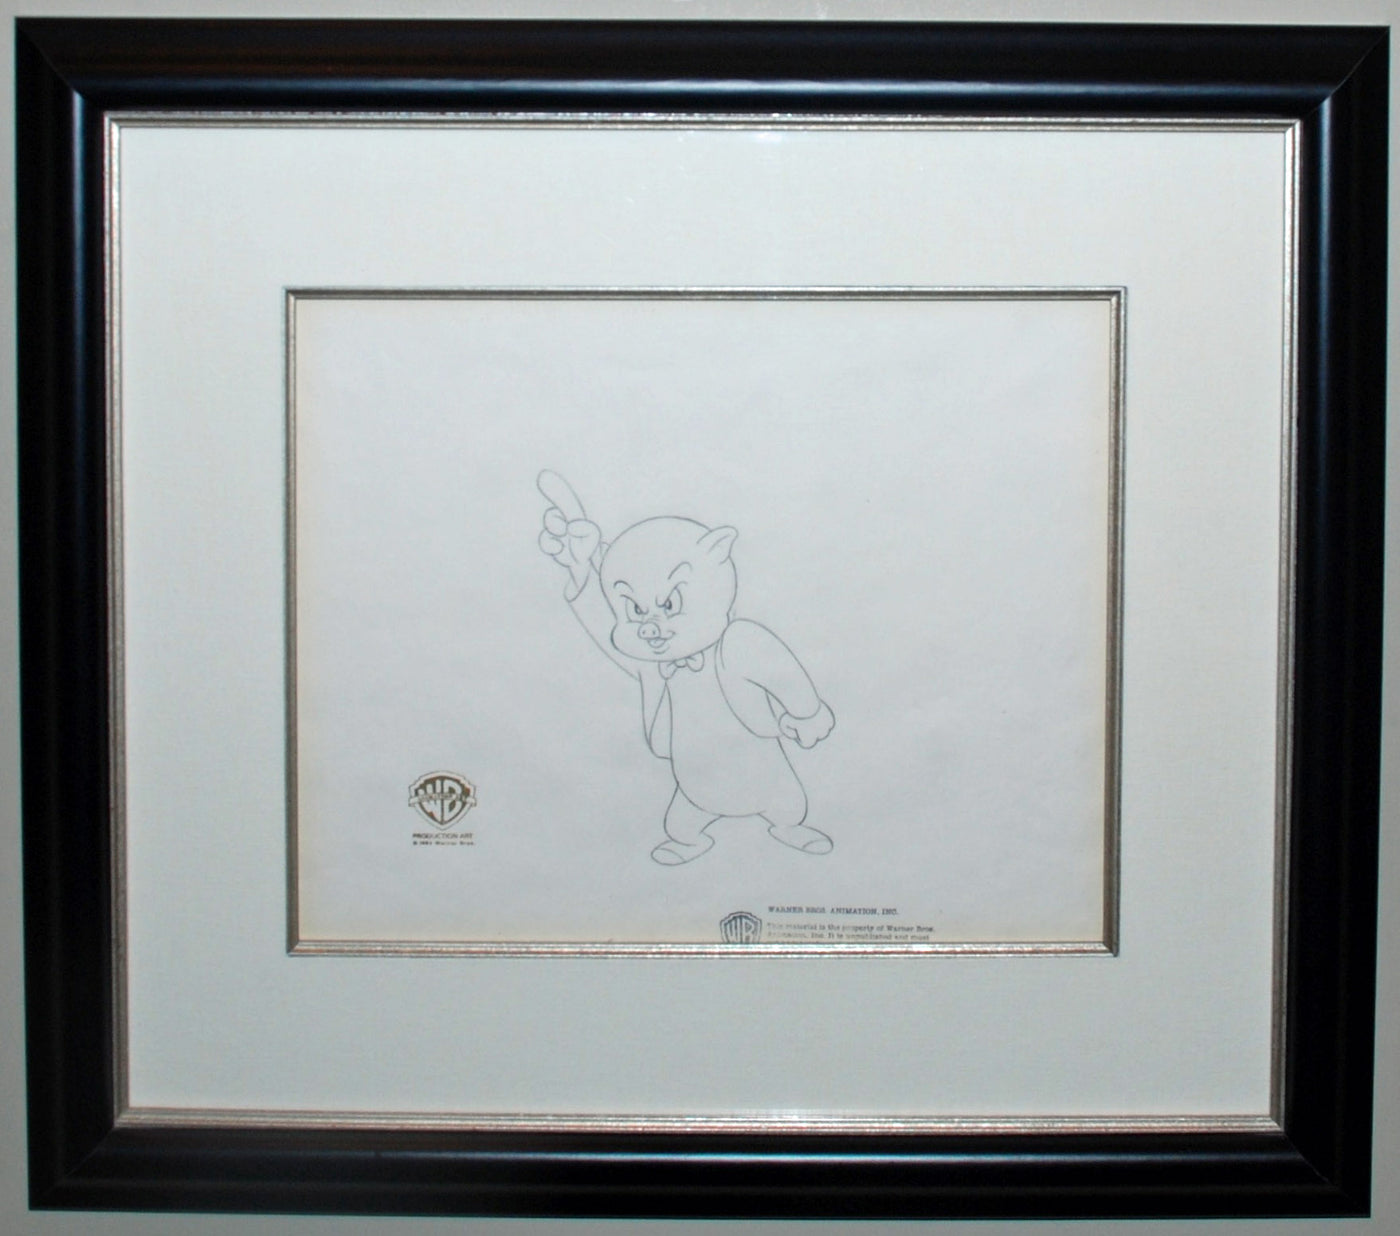 Original Warner Brothers Production Drawing Featuring Porky Pig